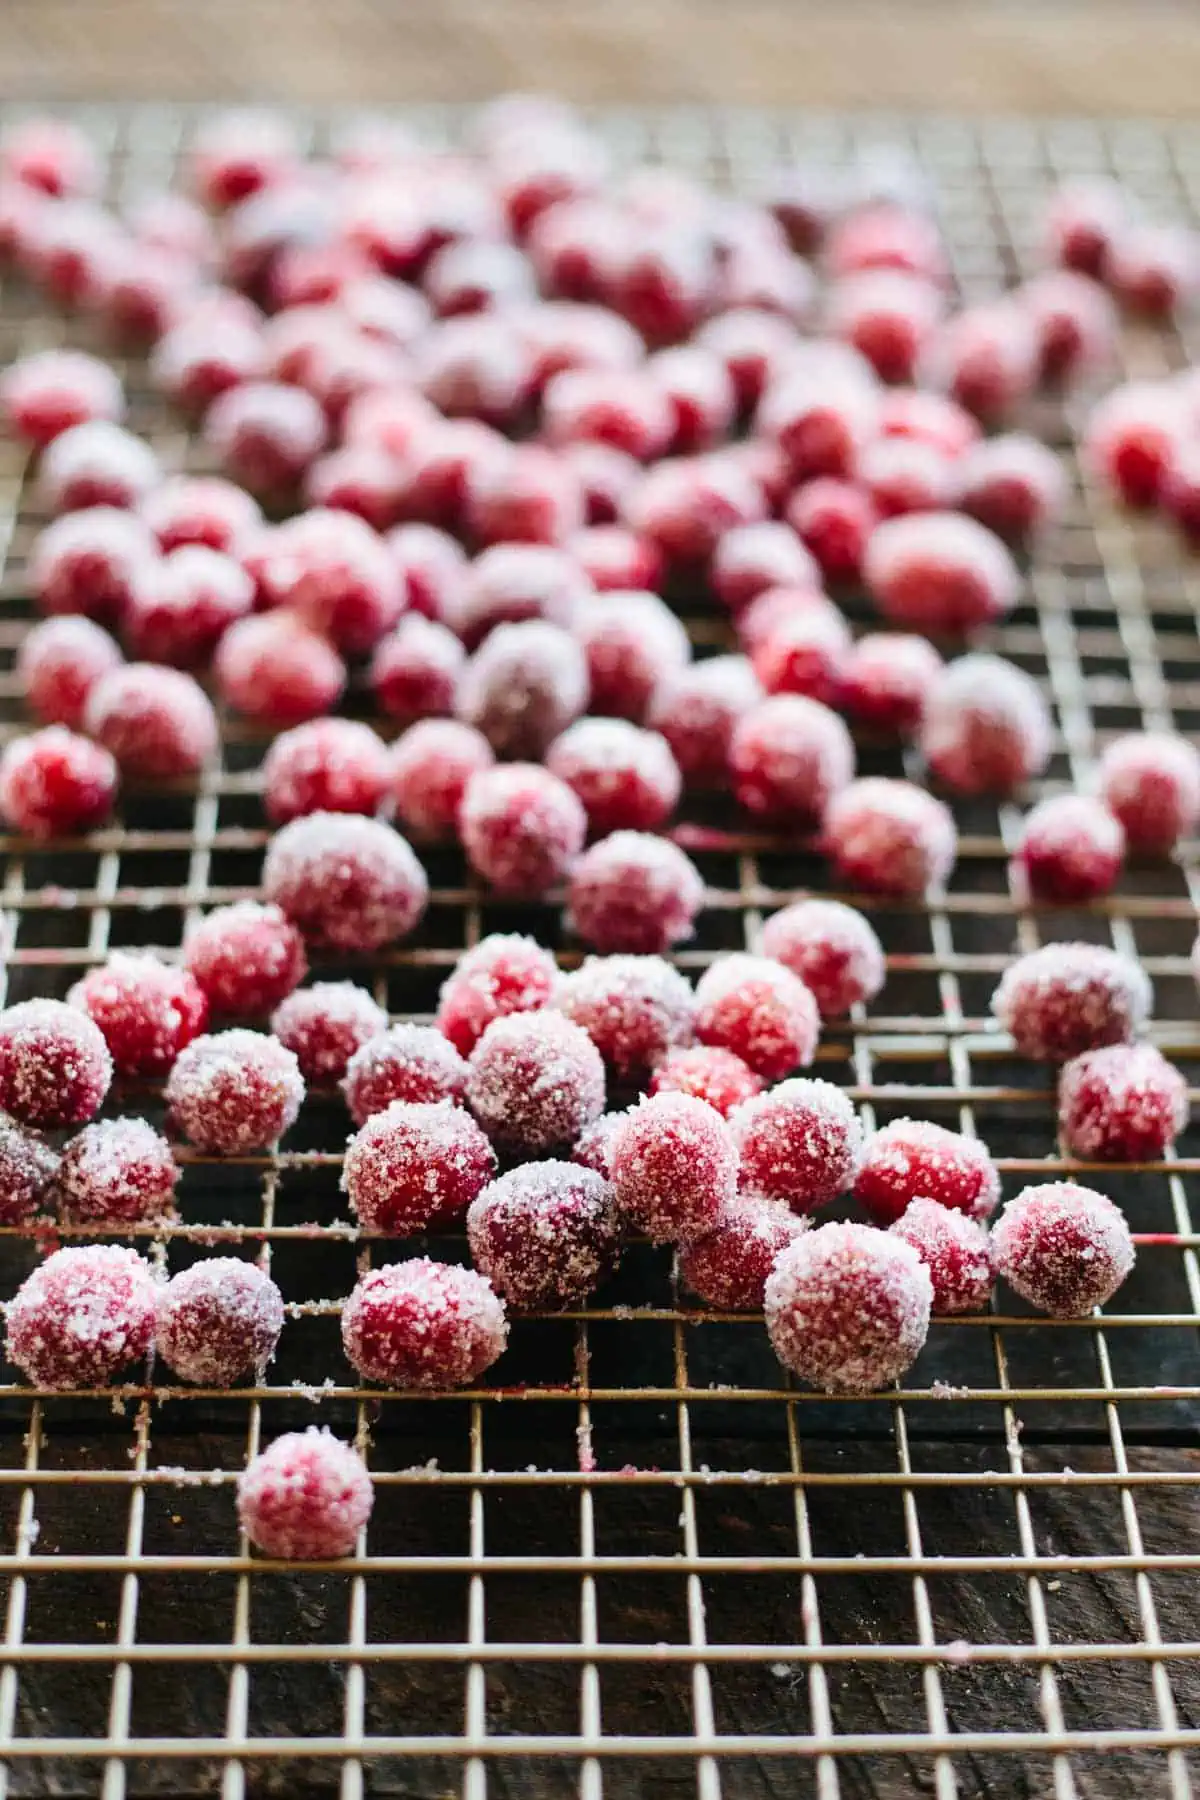 Sugared cranberries on a drying rack.